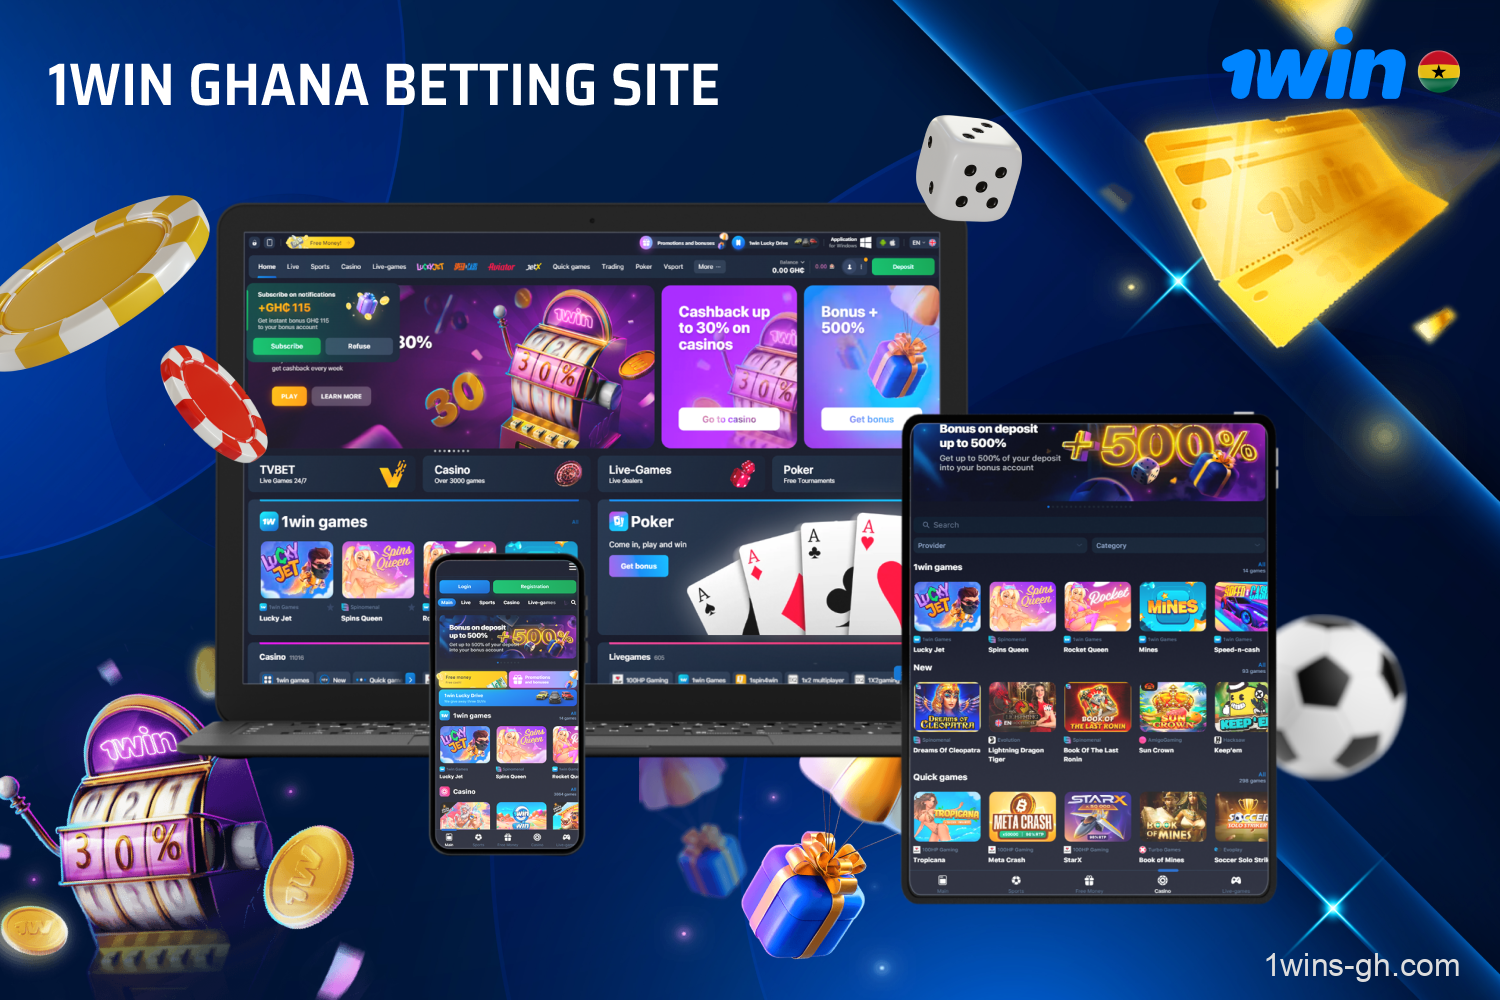 The 1win Ghana betting site offers sports betting and legal gambling access